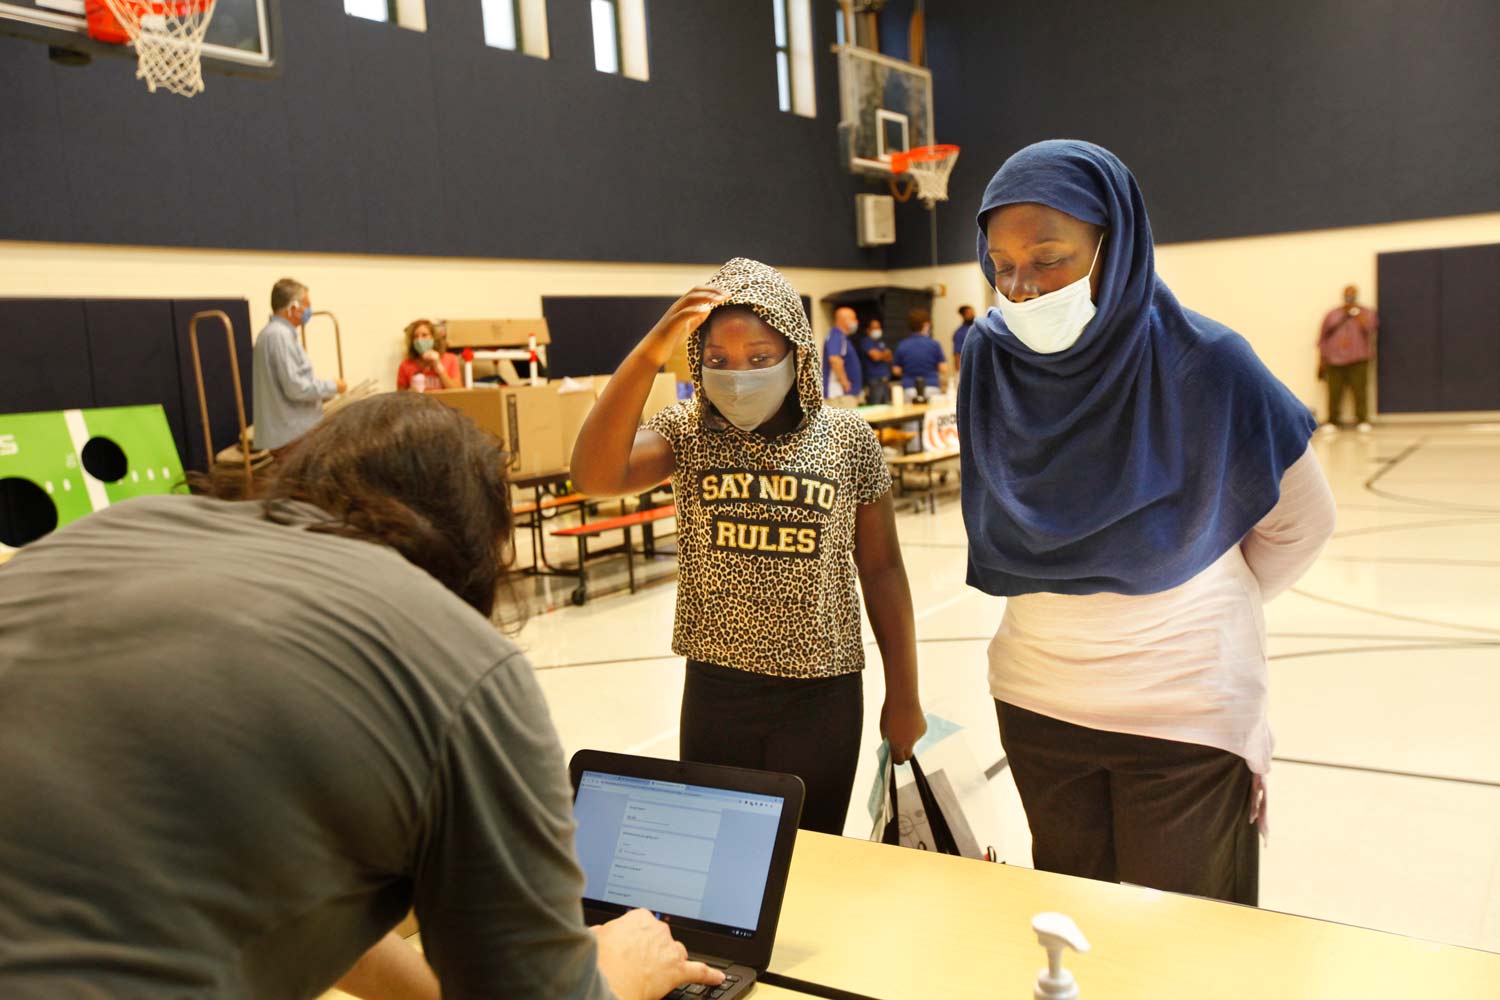 A girl and her mom, who is wearing a hijab, check in with school staff to get school supplies